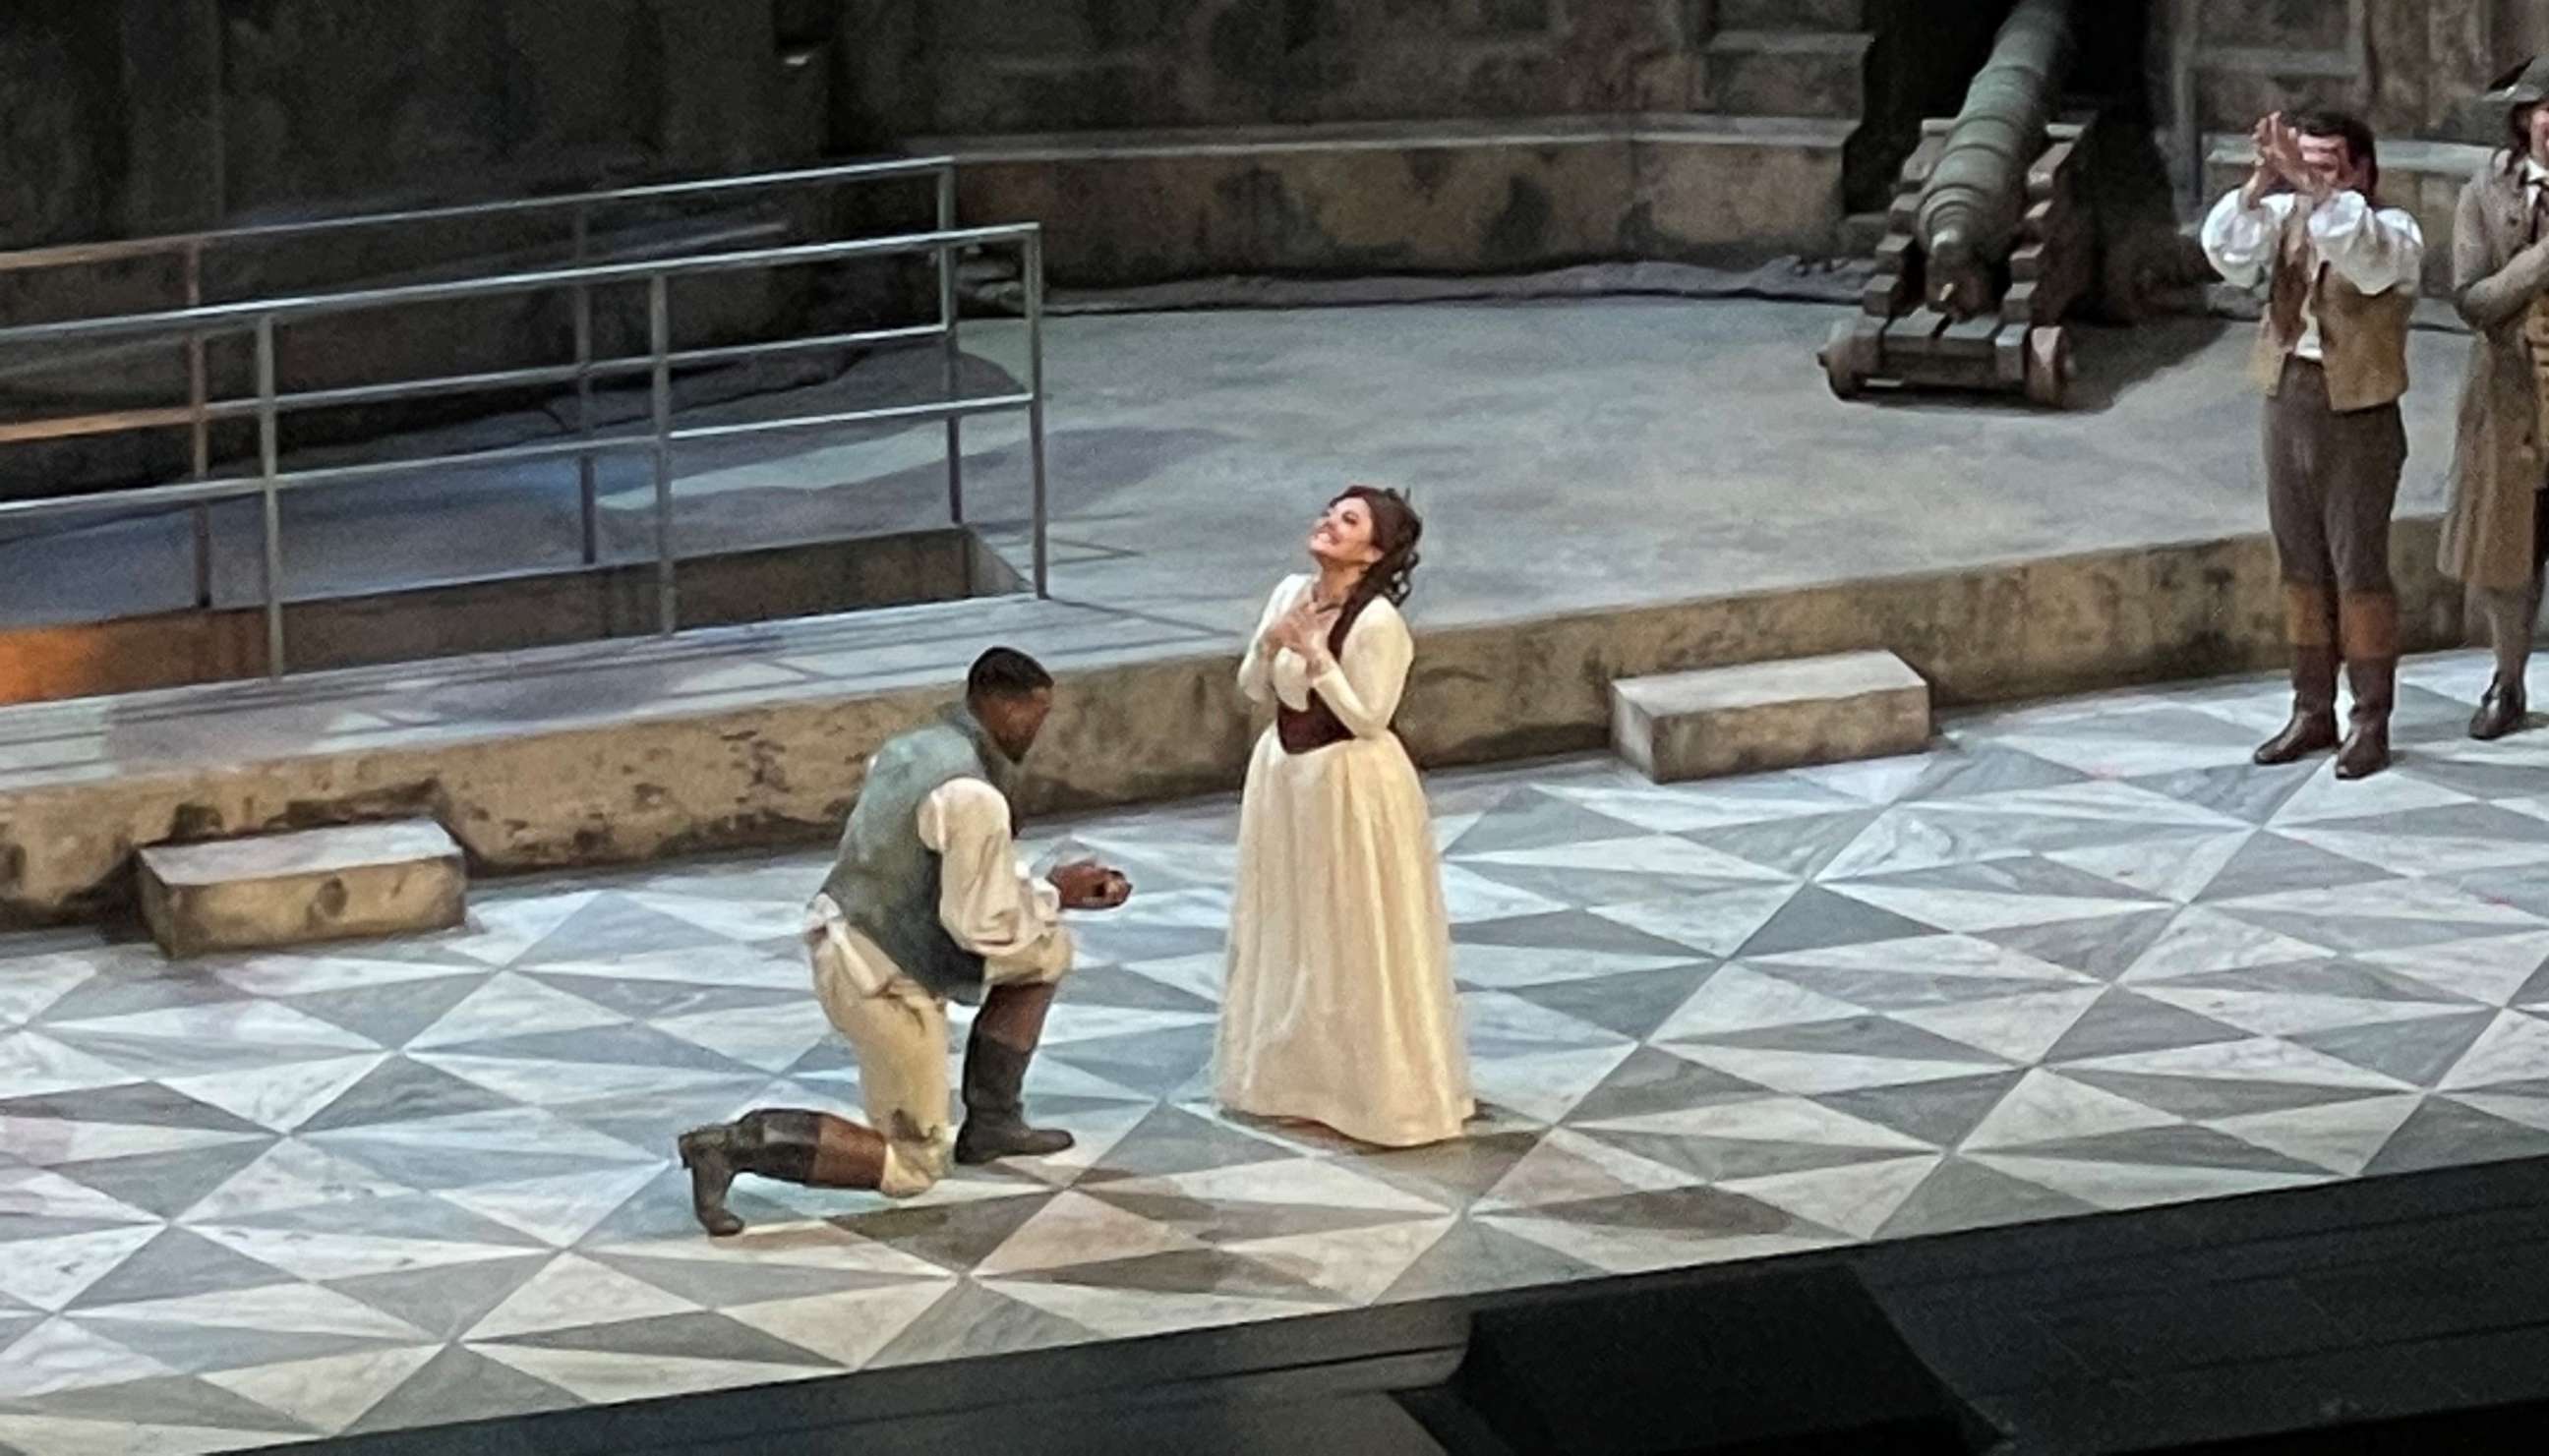 PHOTO: Bass Soloman Howard proposes to Ailyn Perez during curtain call of Tosca at San Francisco Opera.